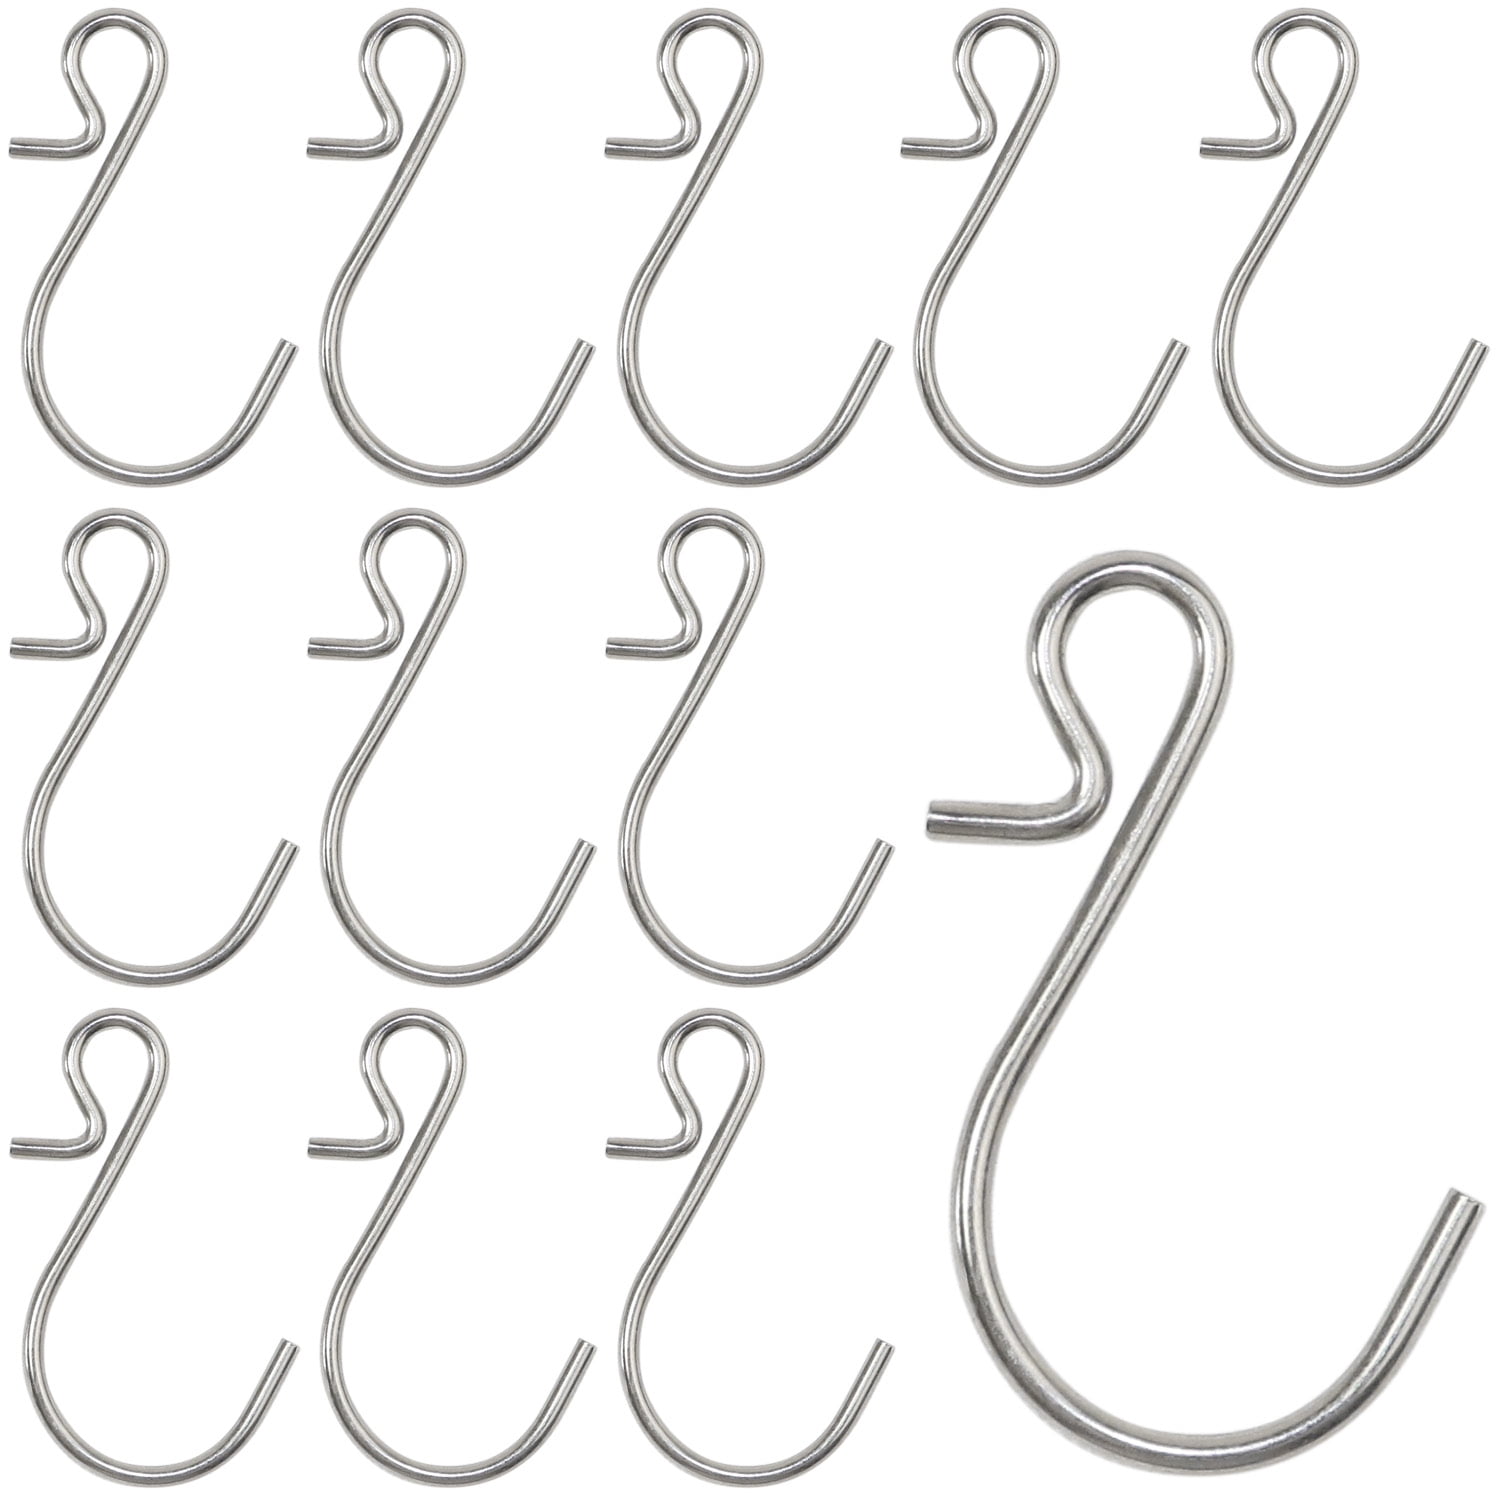 35pcs Small S Hooks Connectors Metal S Shaped Wire Hook Hangers Hanging  Hooks for DIY Crafts, Hanging Jewelry, Key Chain, Tags, Fishing Lure, Net  Equipment 